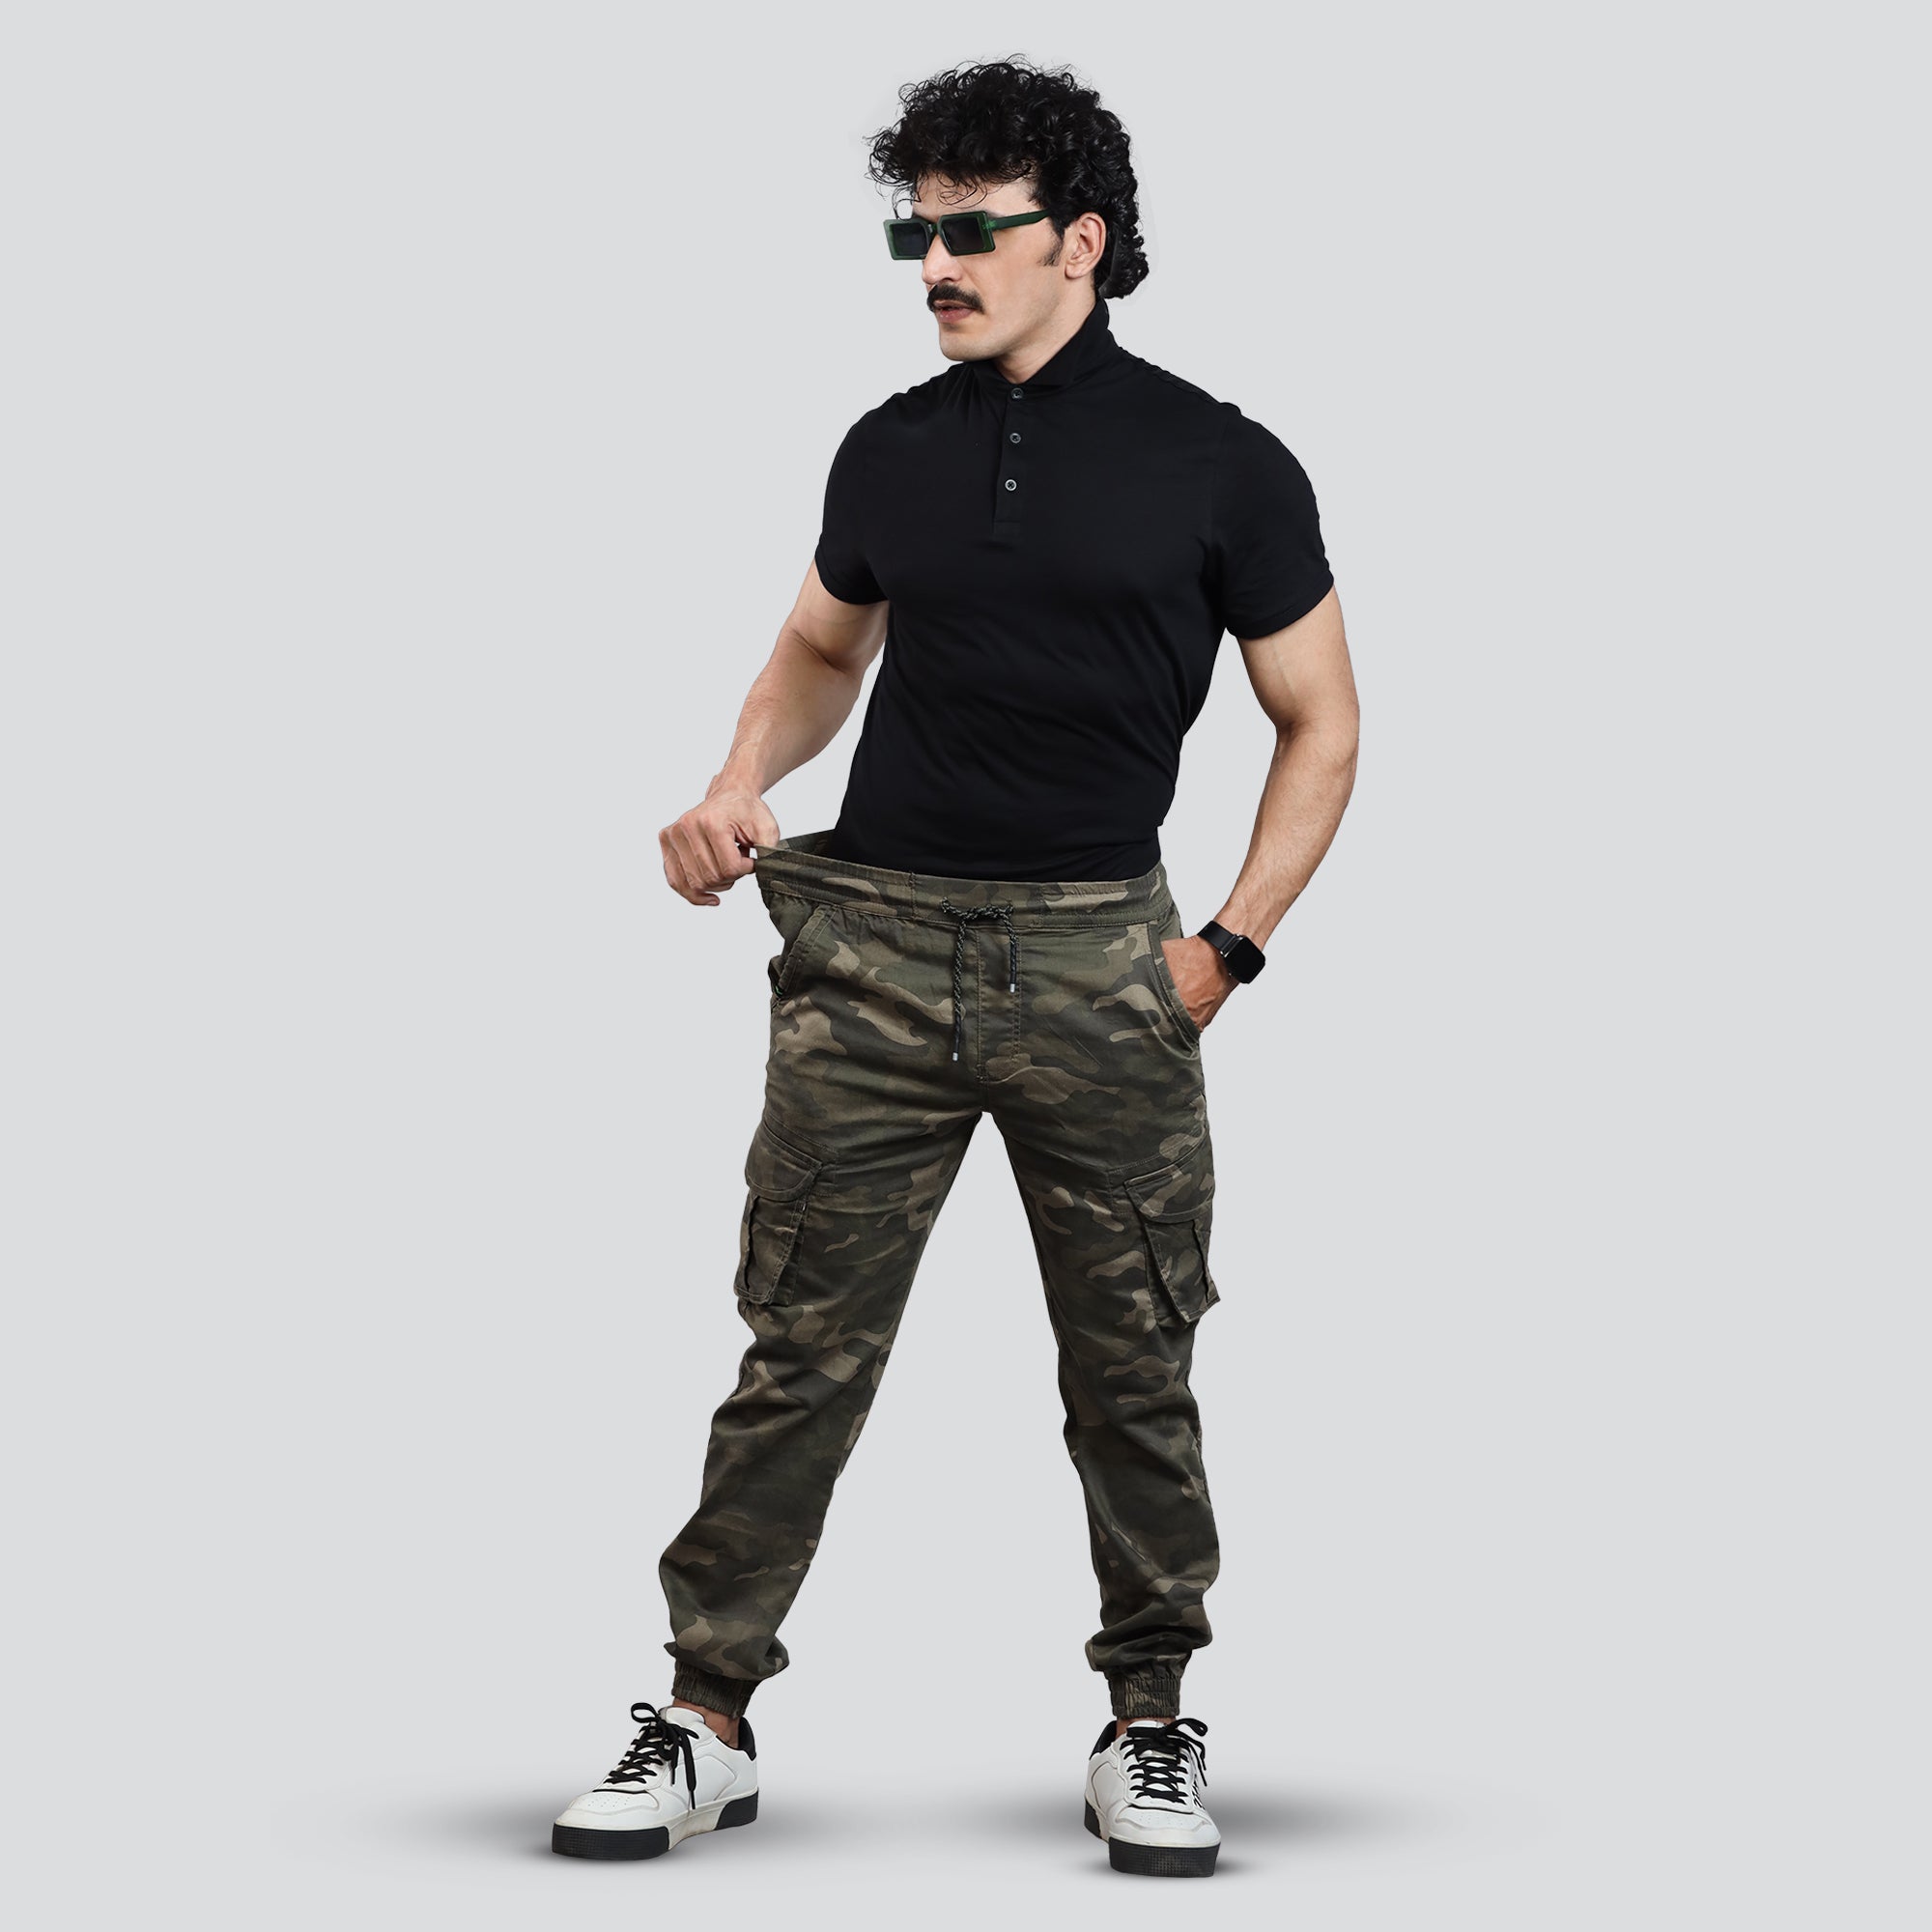 Men's Camouflage Cargo Pants, Stretchable Trousers With 6 Pockets